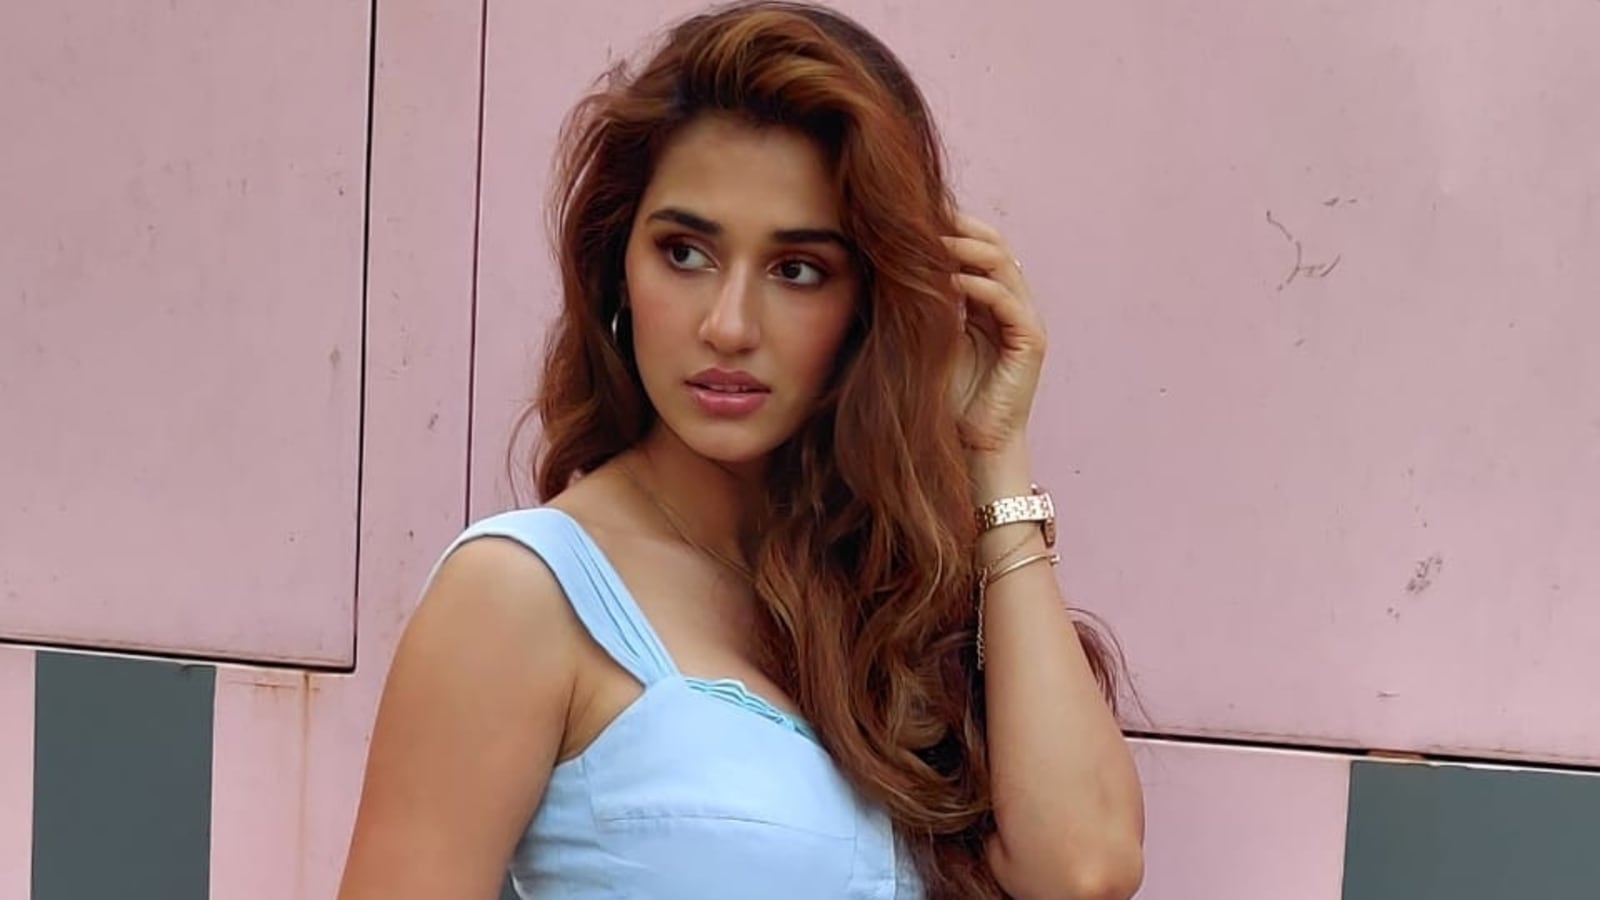 When Disha Patani Said No Guy Has Ever Told Her She Is Hot Or Flirted